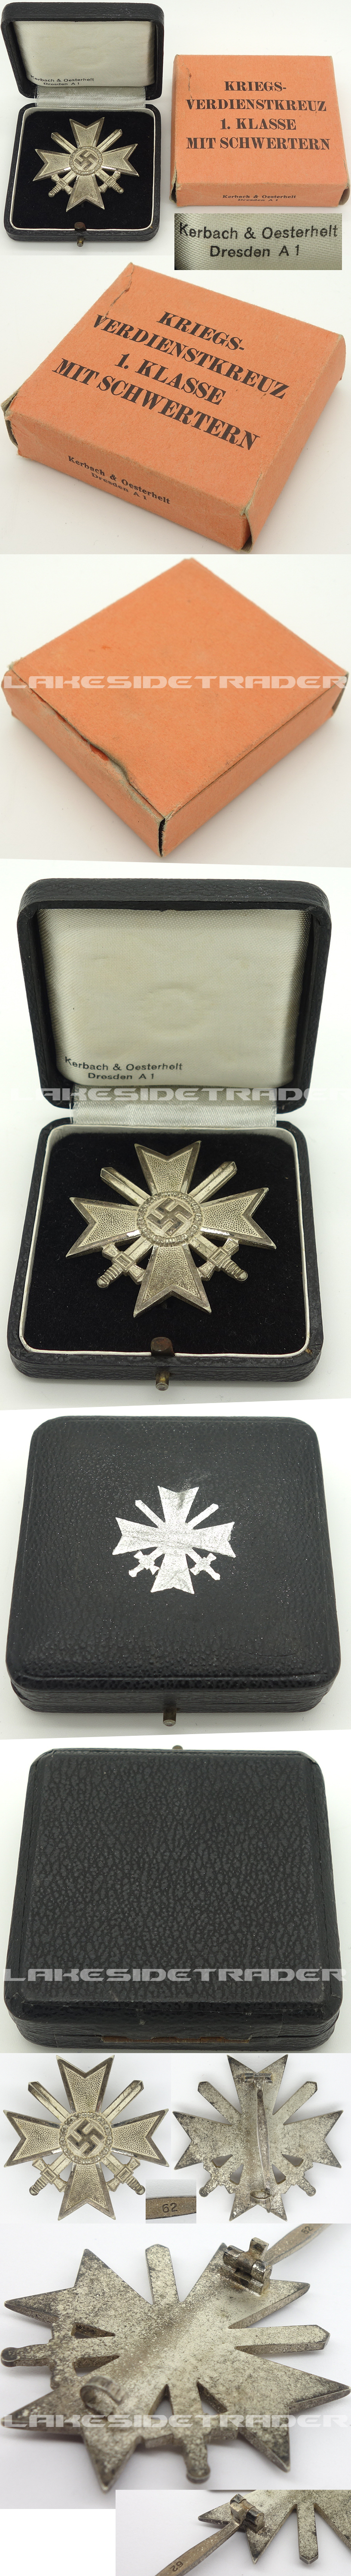 Minty Matching Boxed & Cased 1st Class War Merit Cross by  Kerbach & Oester